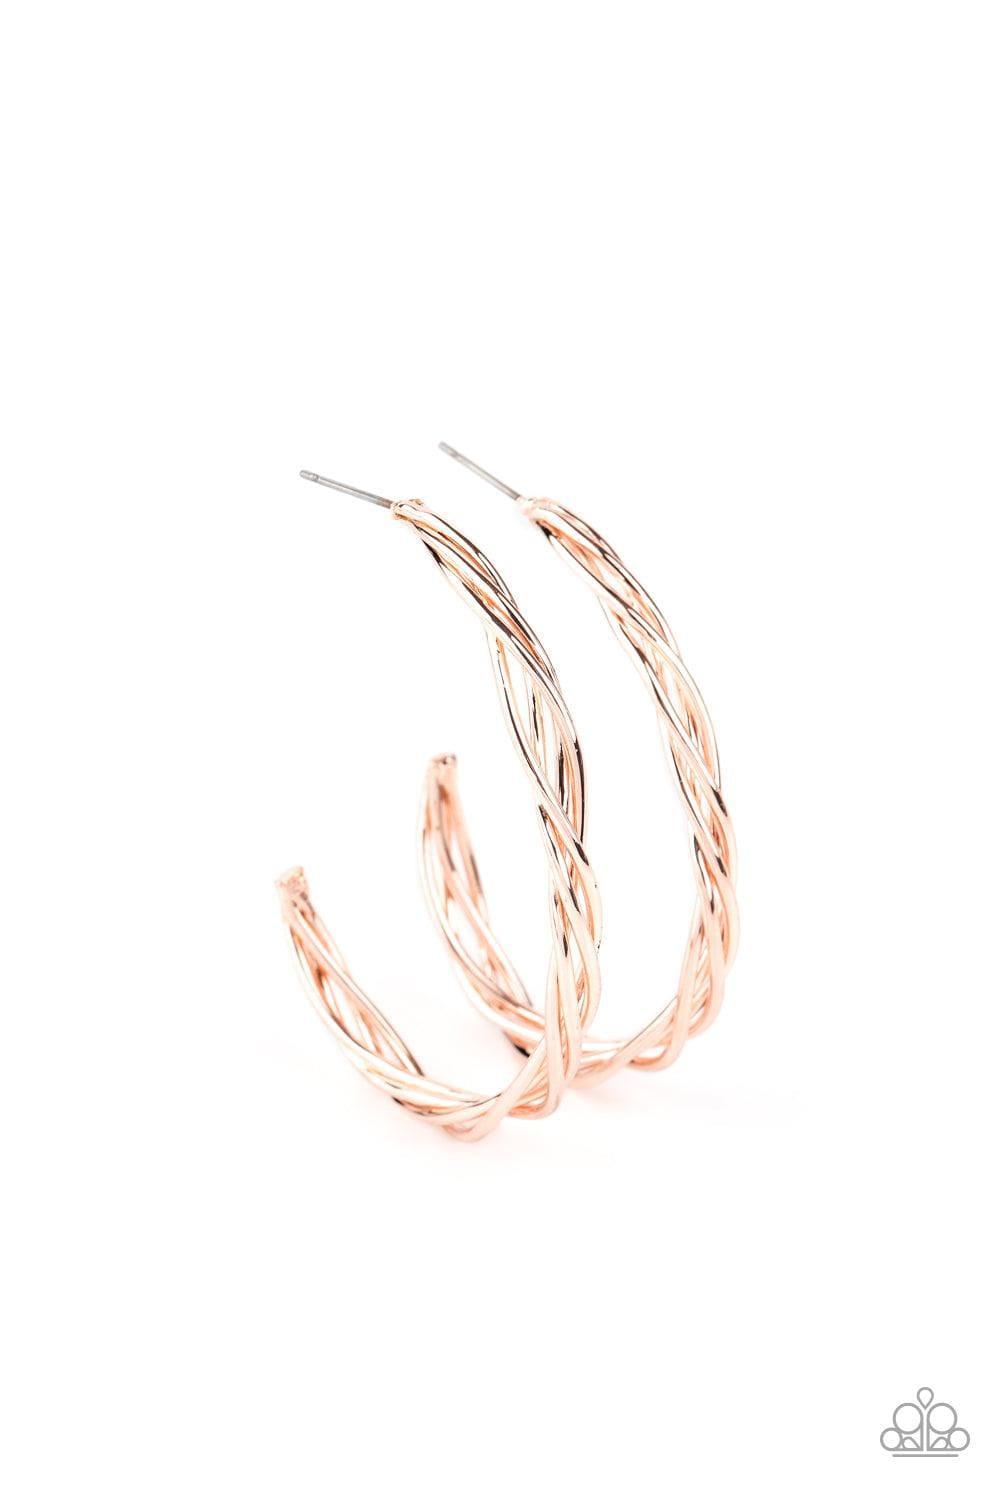 Paparazzi Accessories - Twisted Tango - Rose Gold Earrings - Bling by JessieK